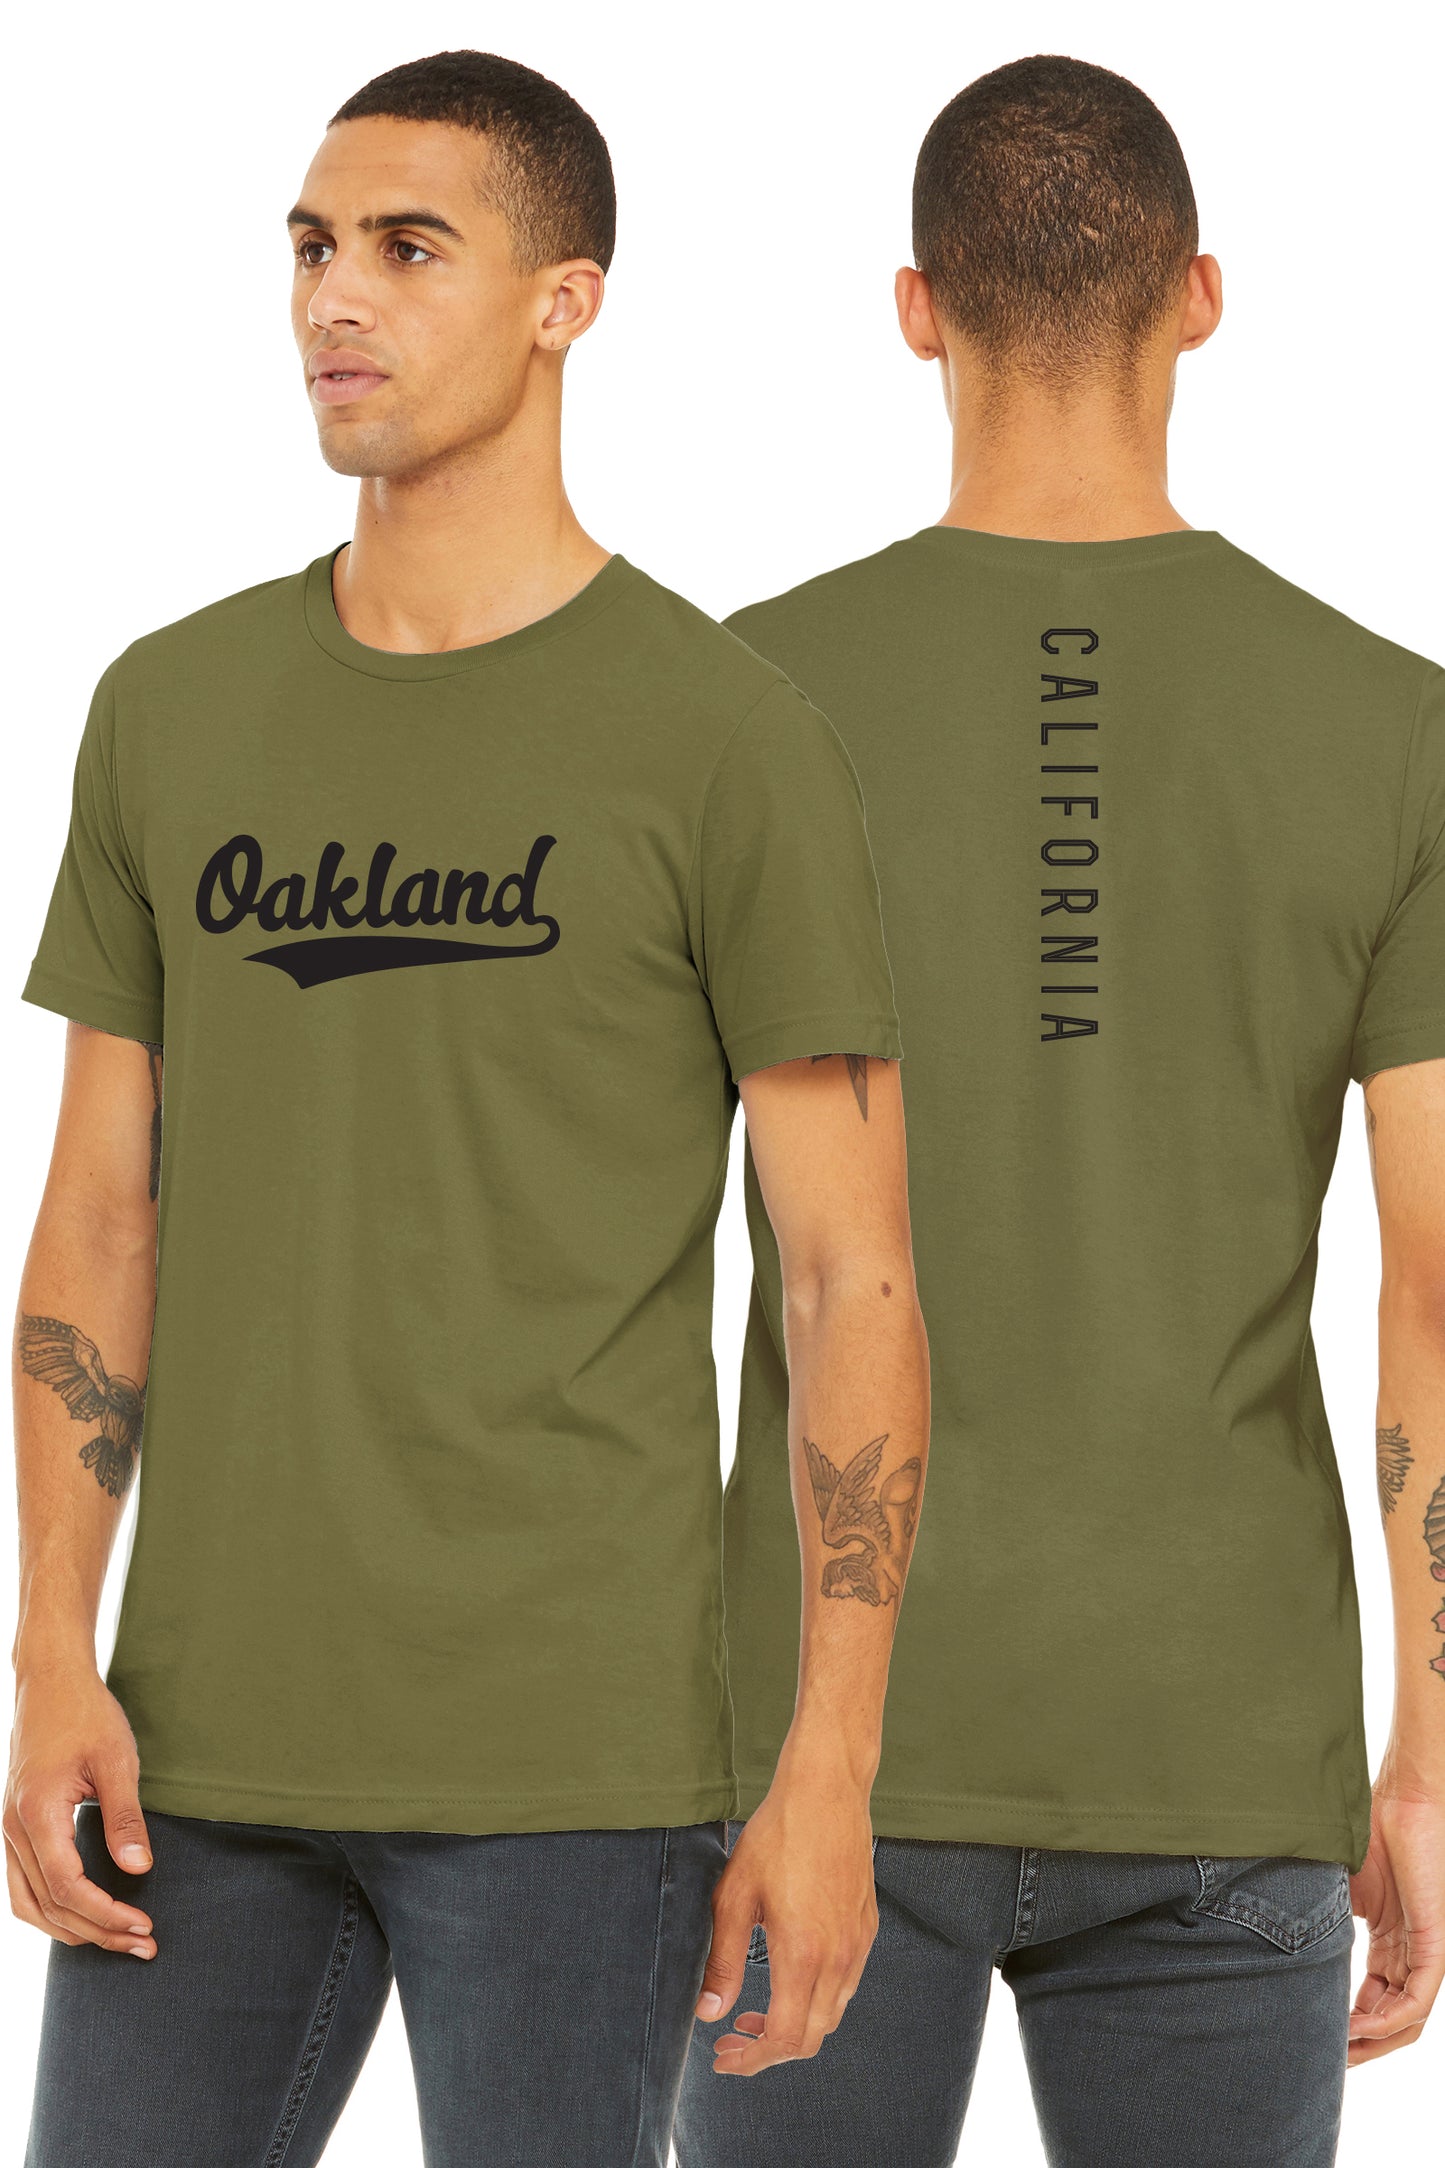 Daxton Adult Unisex Tshirt Oakland Script with California Vertical on the Back